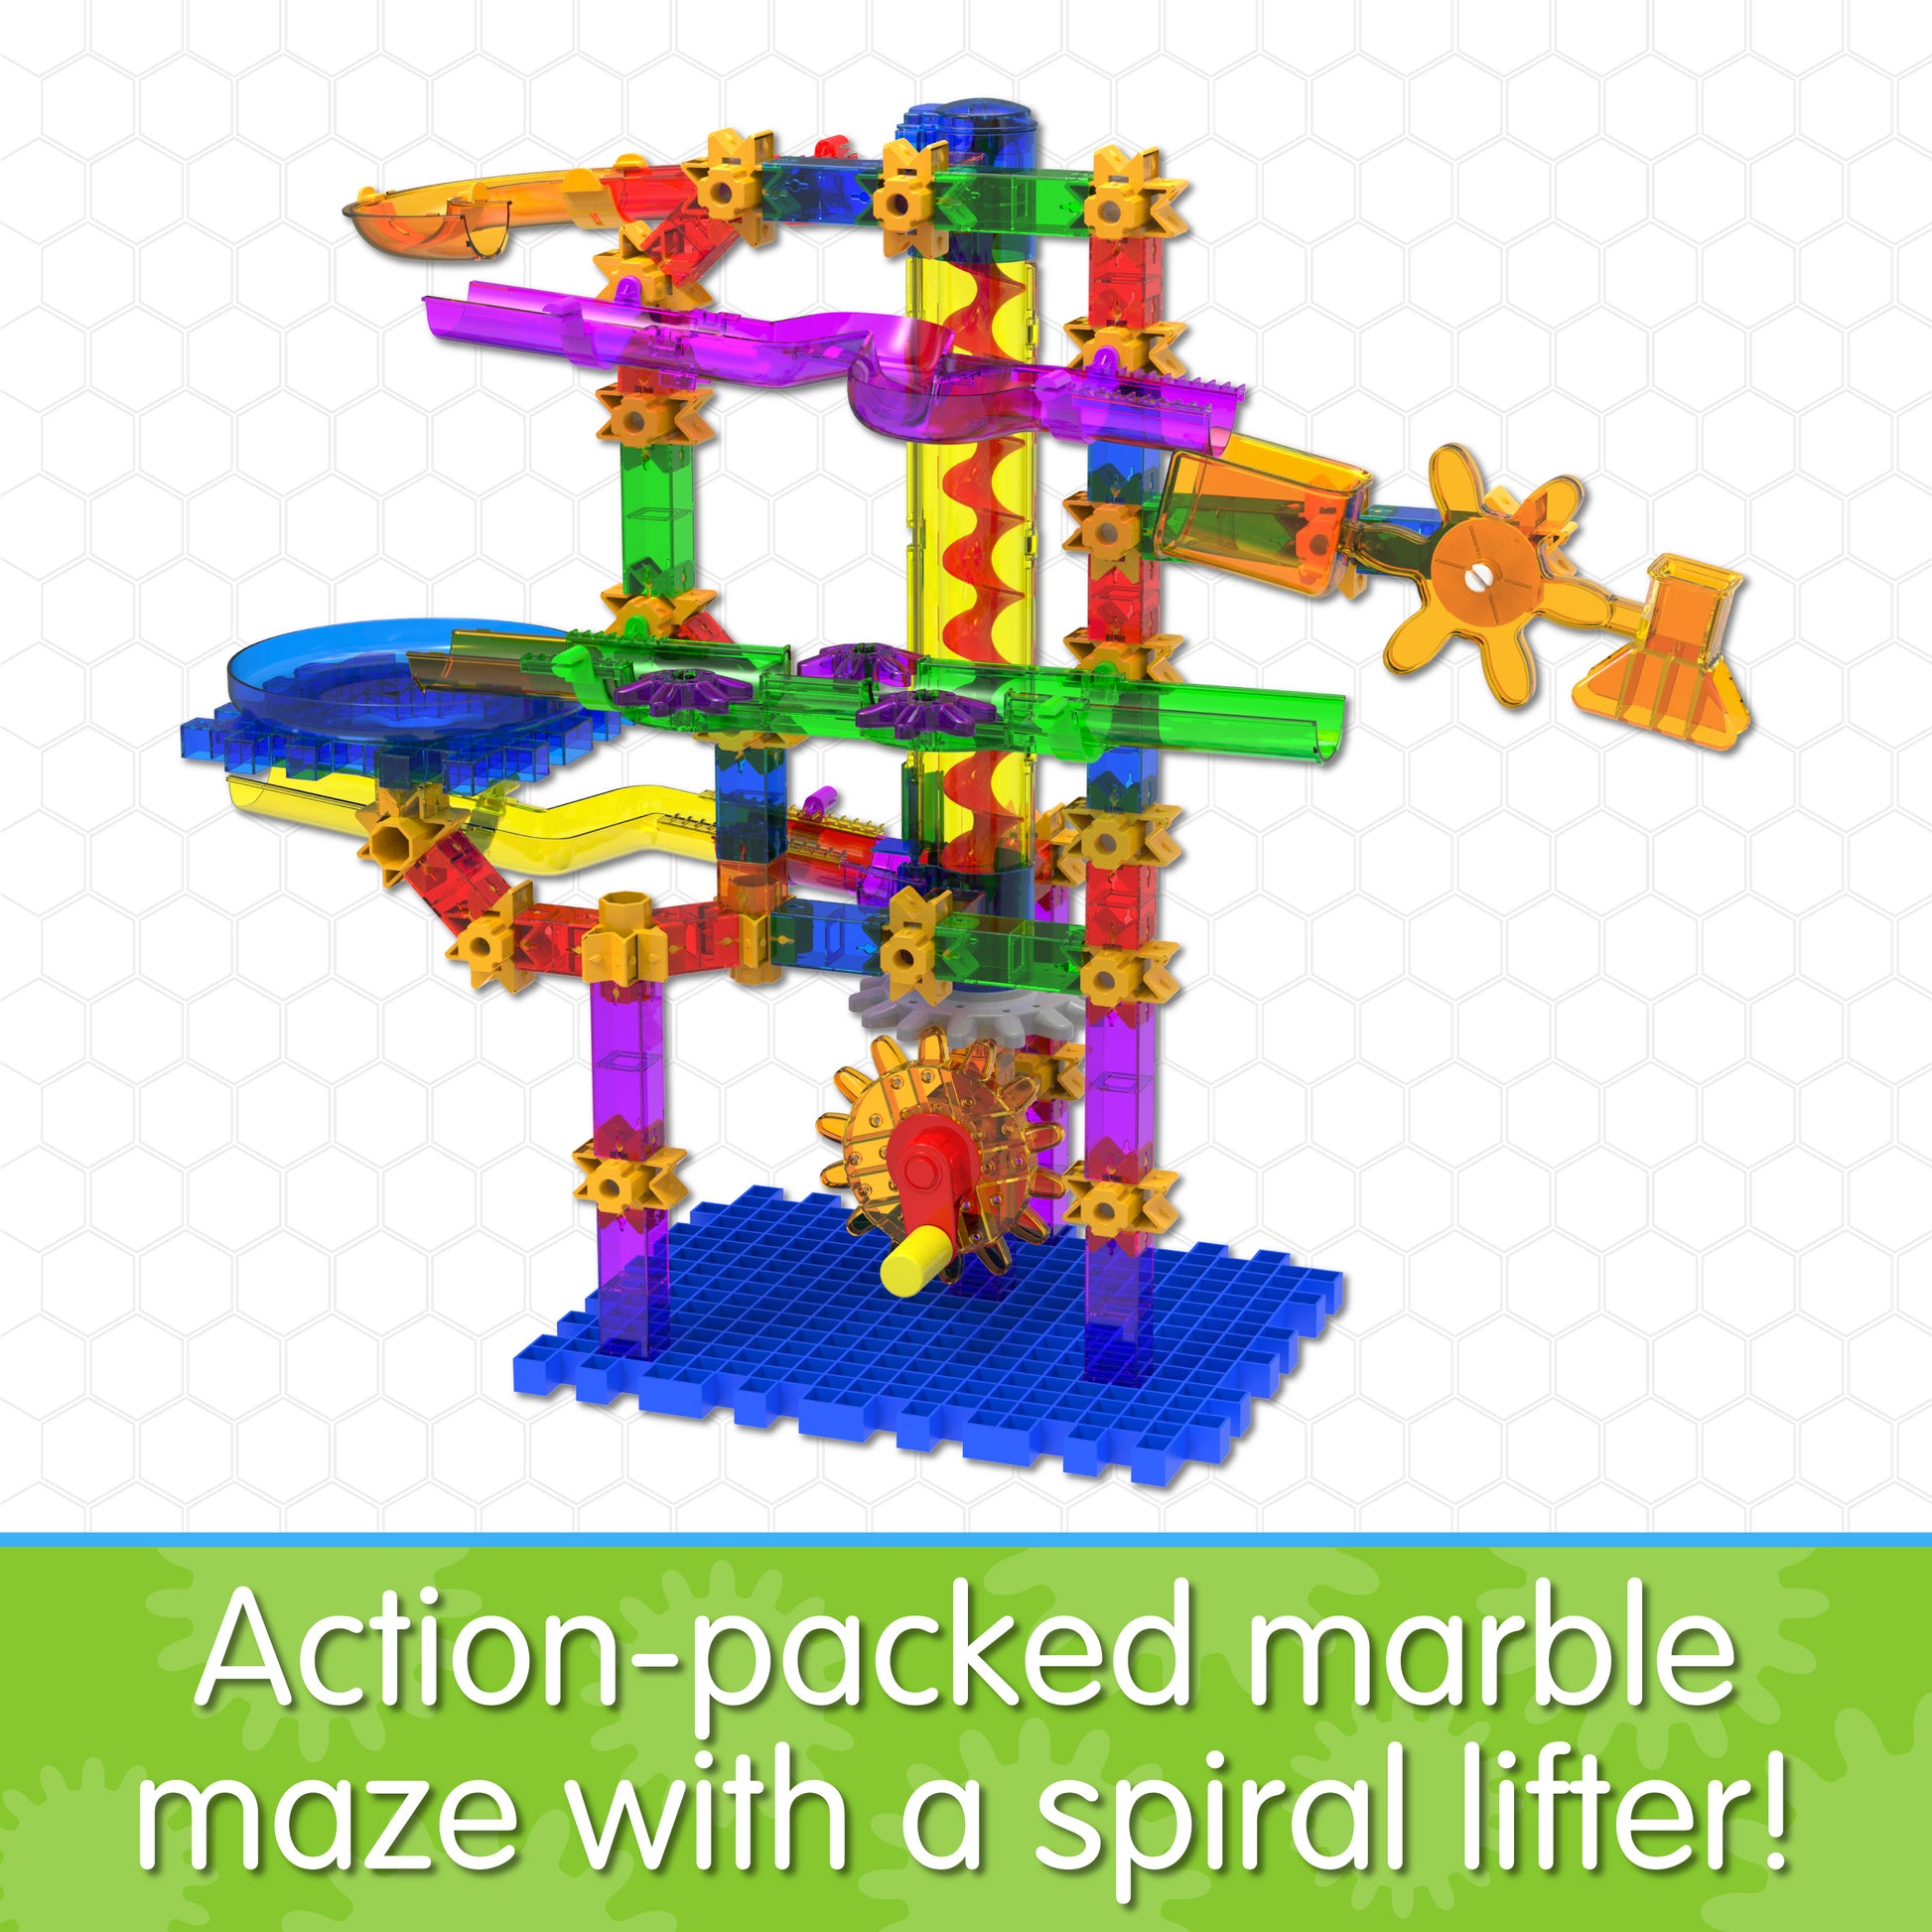 Infographic about Twister that says, "Action-packed marble maze with a spiral lifter!"